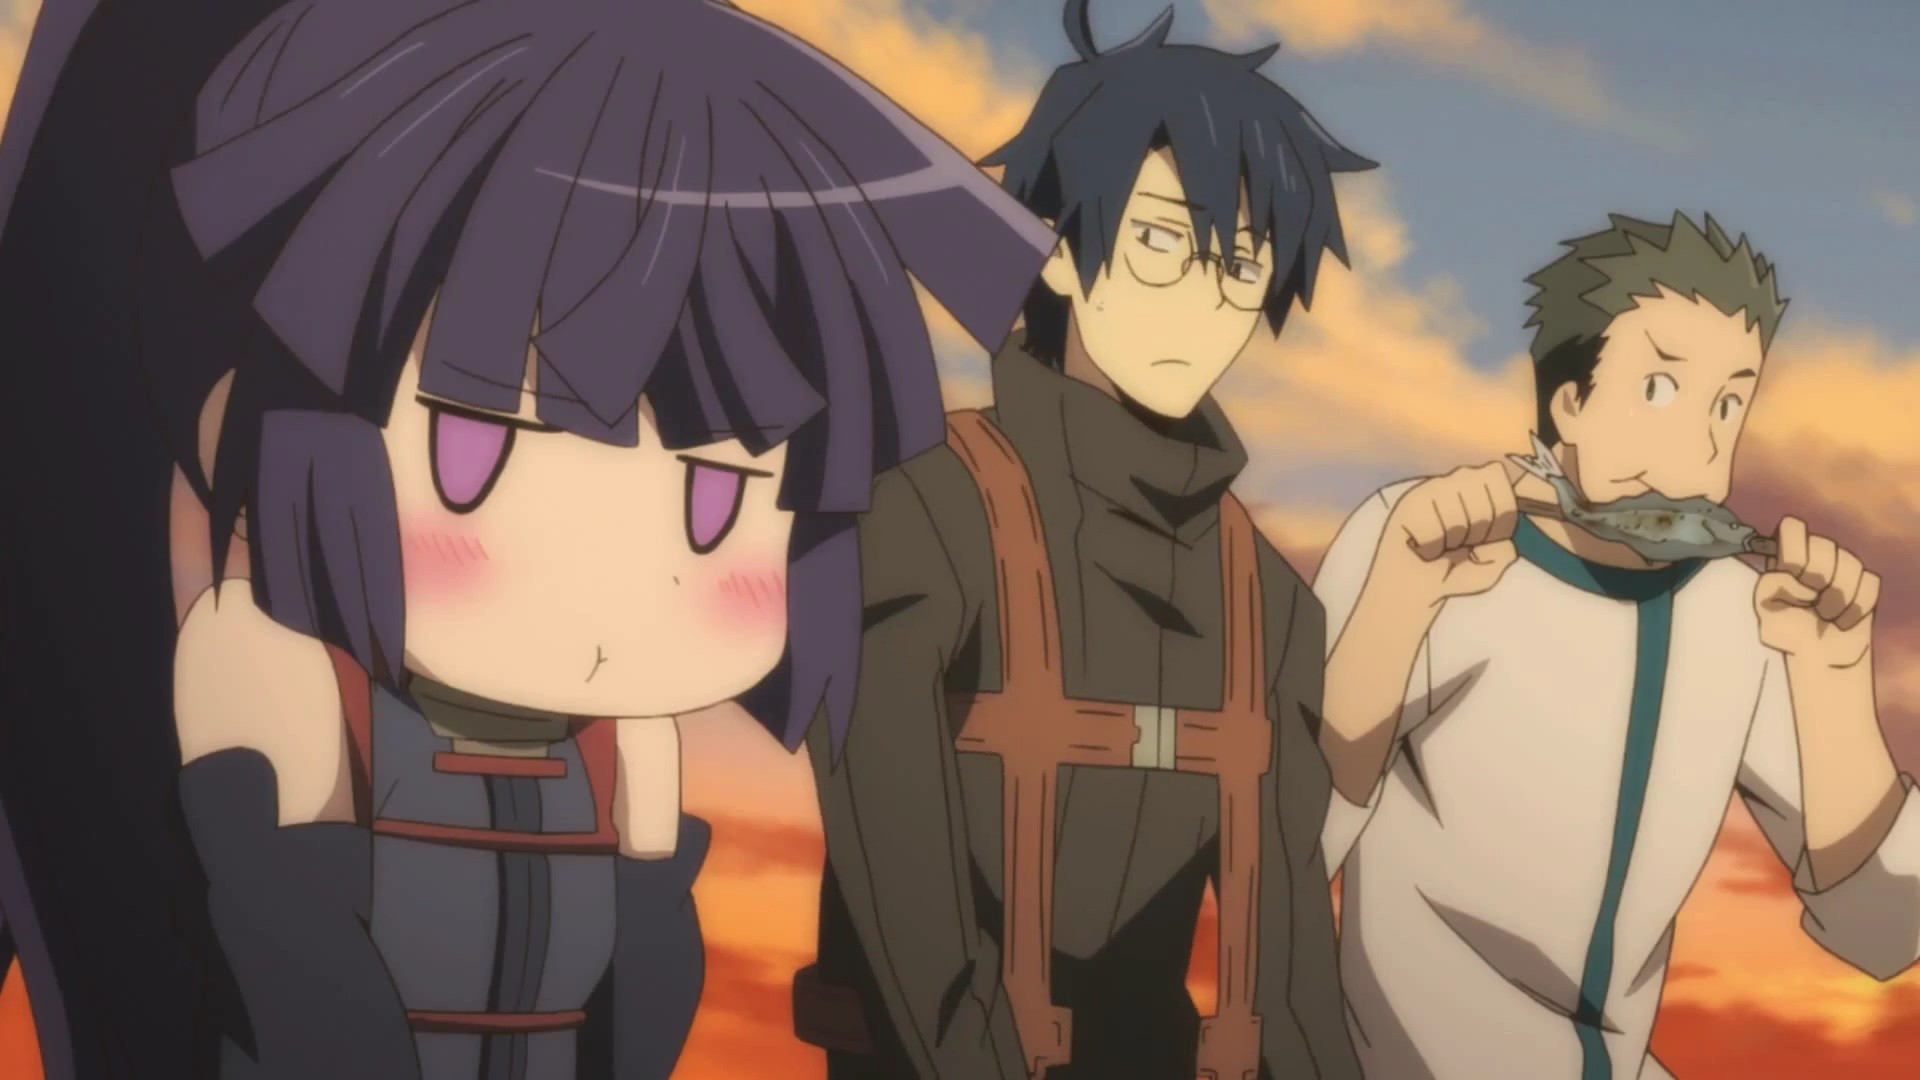 I would say that Log Horizon is very different from those shows despite sharing a similar subject matter and ultimately attempts to appeal and interest